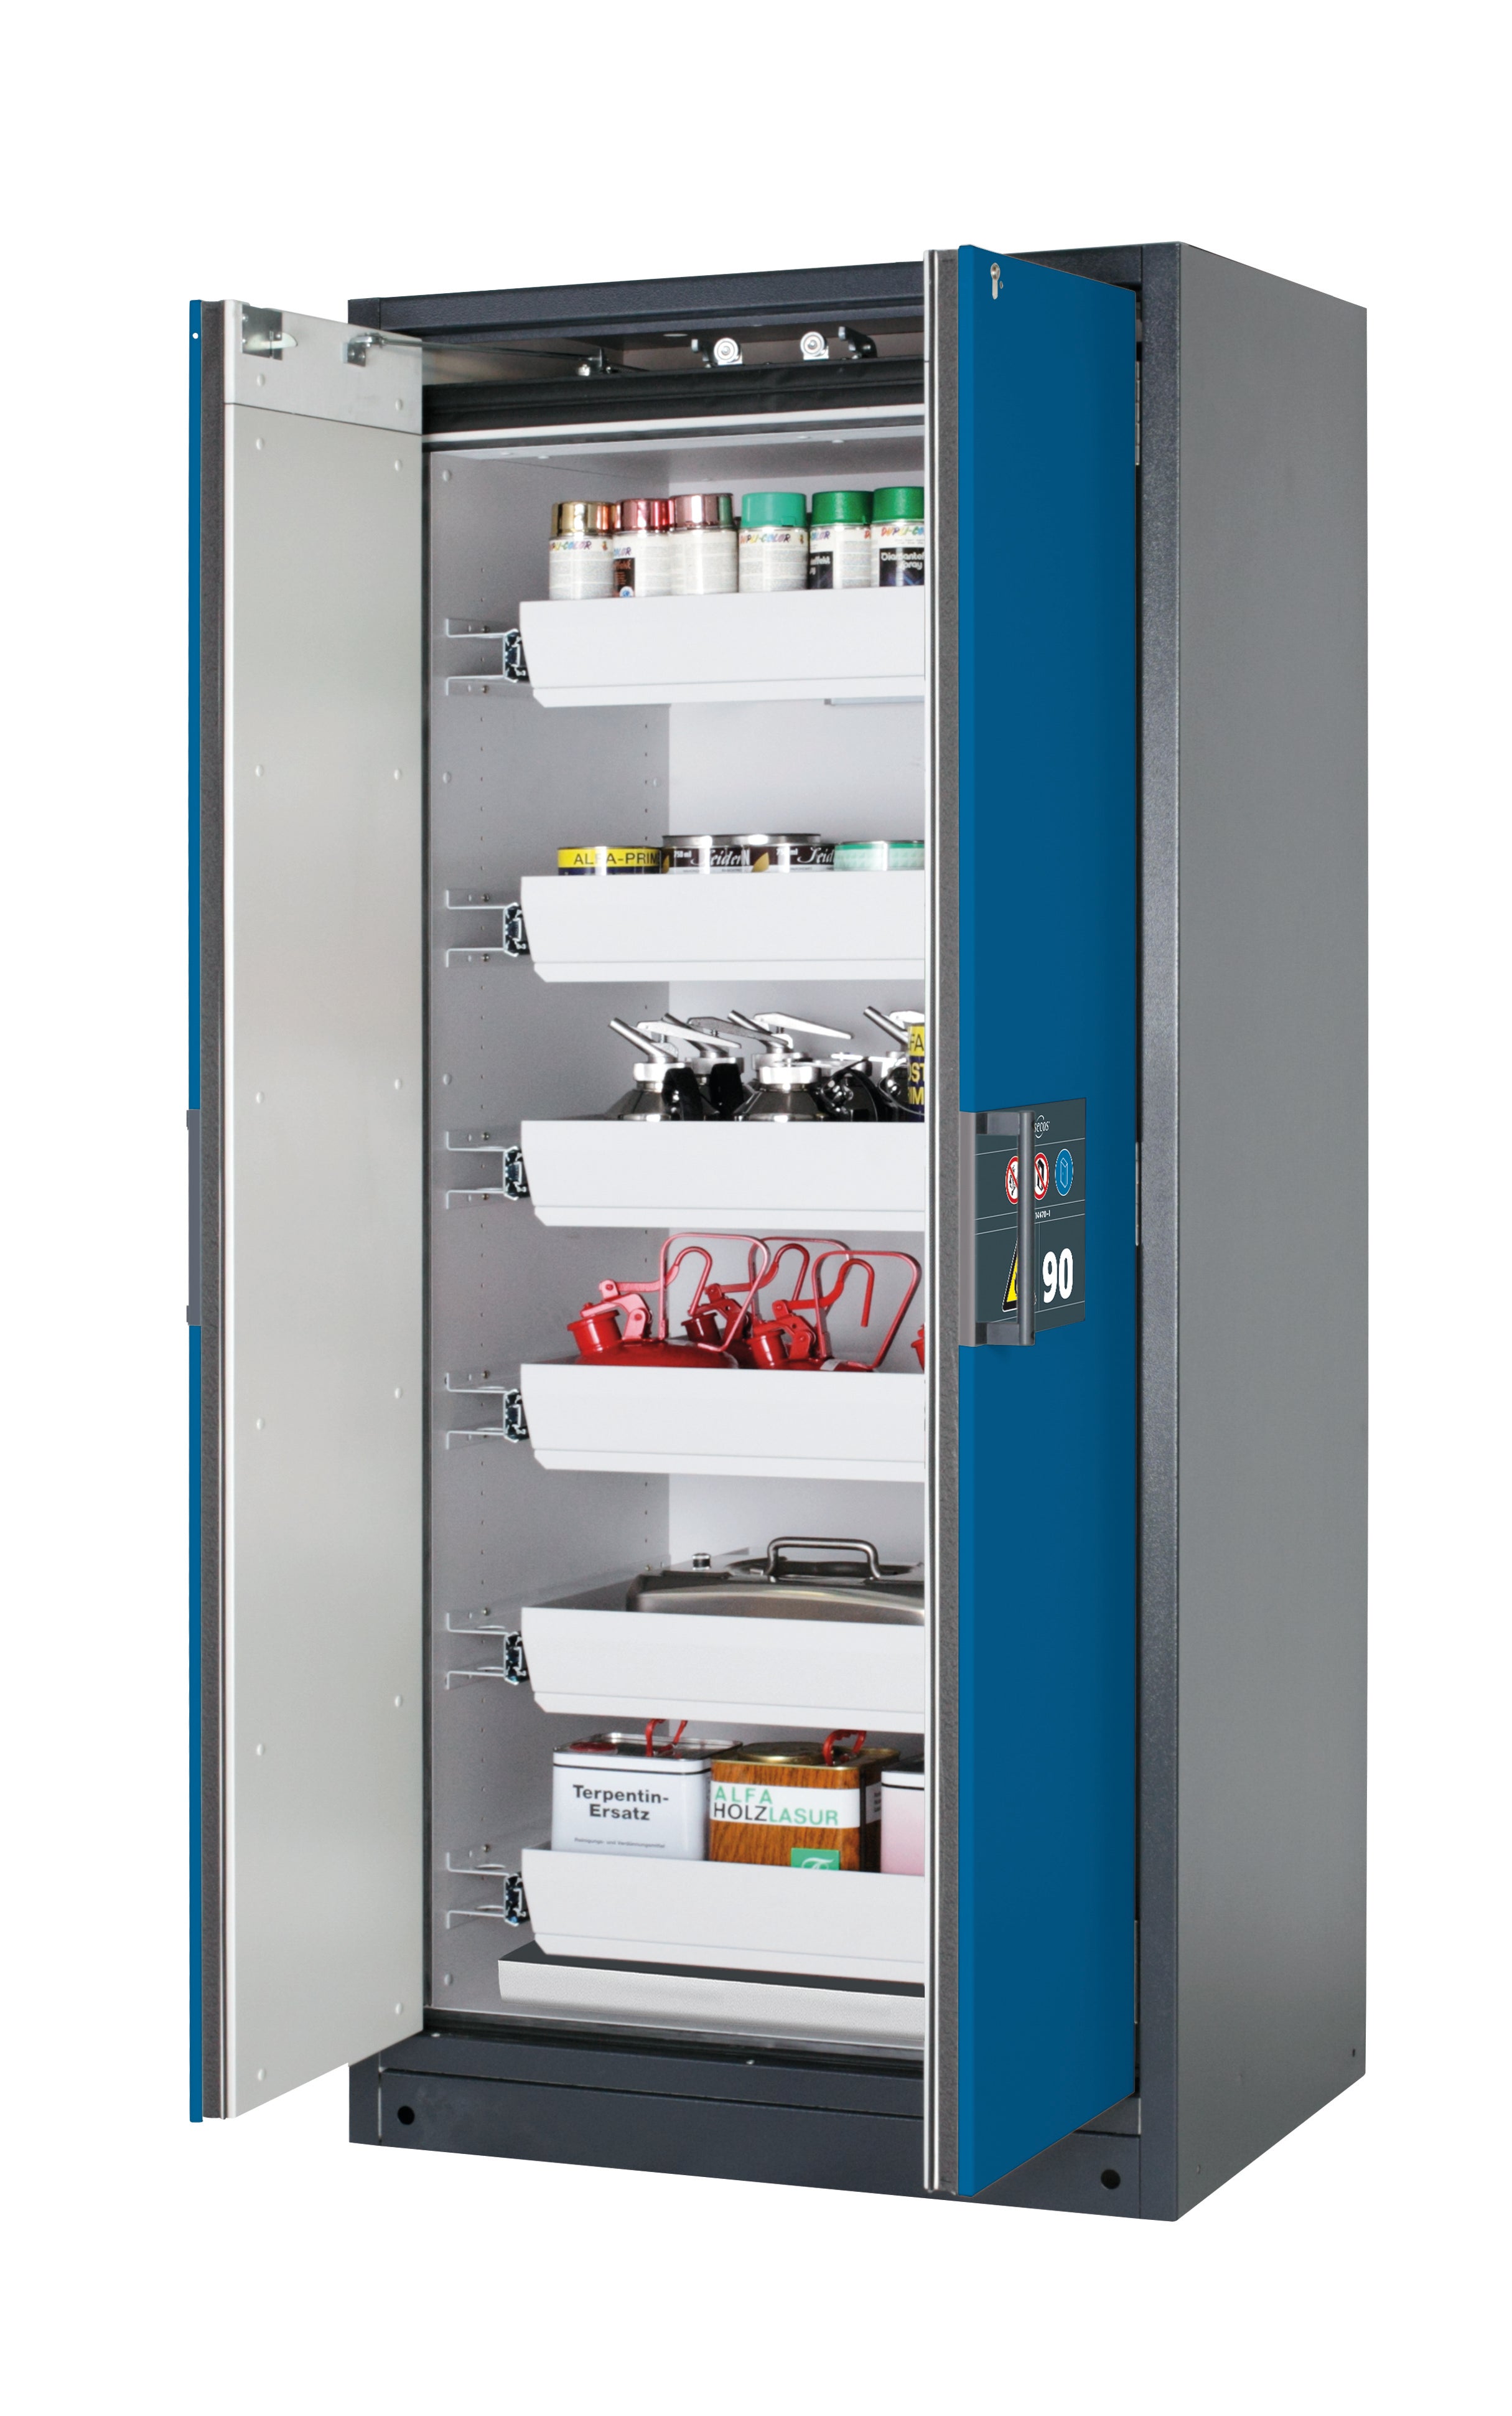 Type 90 safety storage cabinet Q-PEGASUS-90 model Q90.195.090.WDAC in gentian blue RAL 5010 with 6x drawer (standard) (sheet steel),